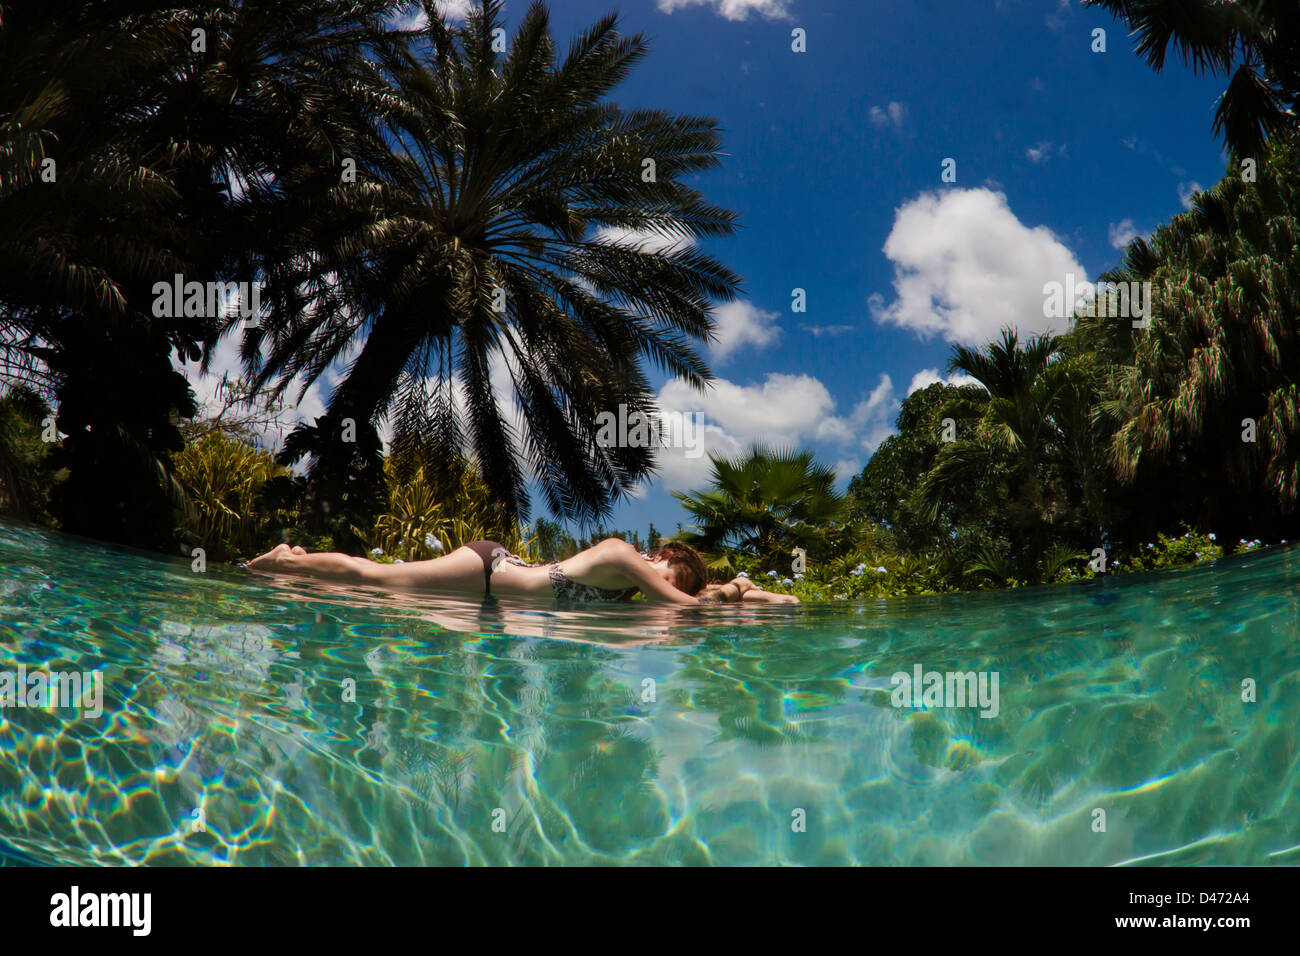 A woman lies at the edge of an infinity pool with a tropical background, Curacao, Netherlands Antilles, in the Caribbean. Stock Photo